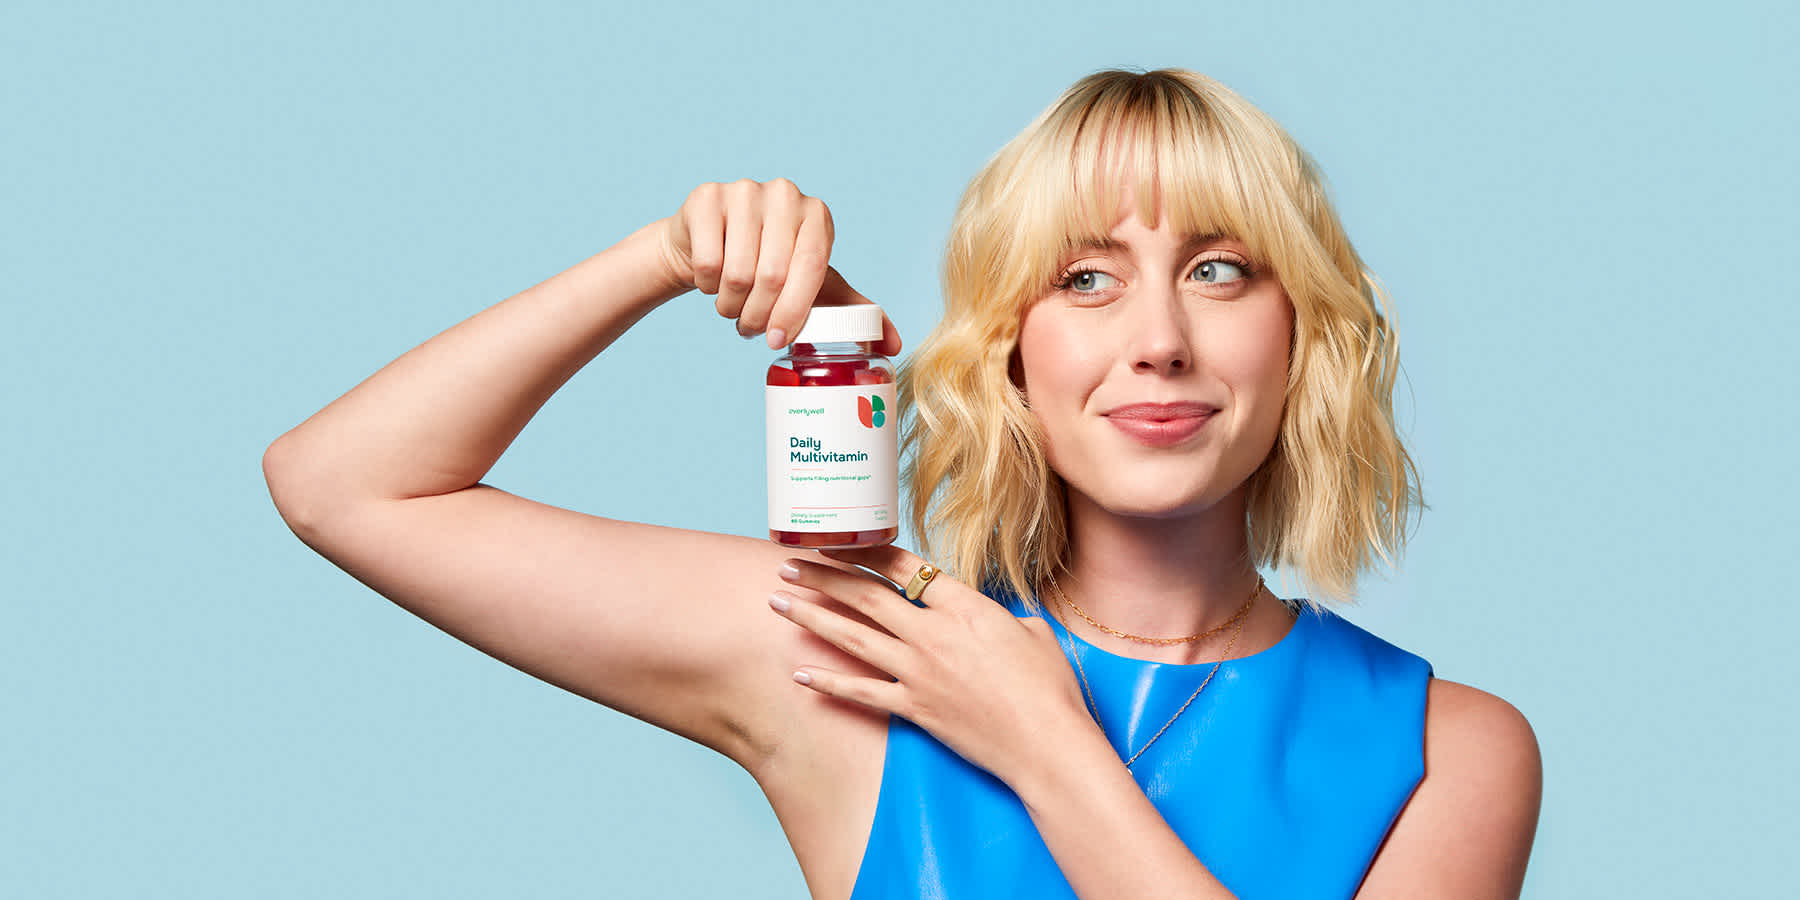 Young woman holding bottle of Everlywell Daily Multivitamins against a blue background